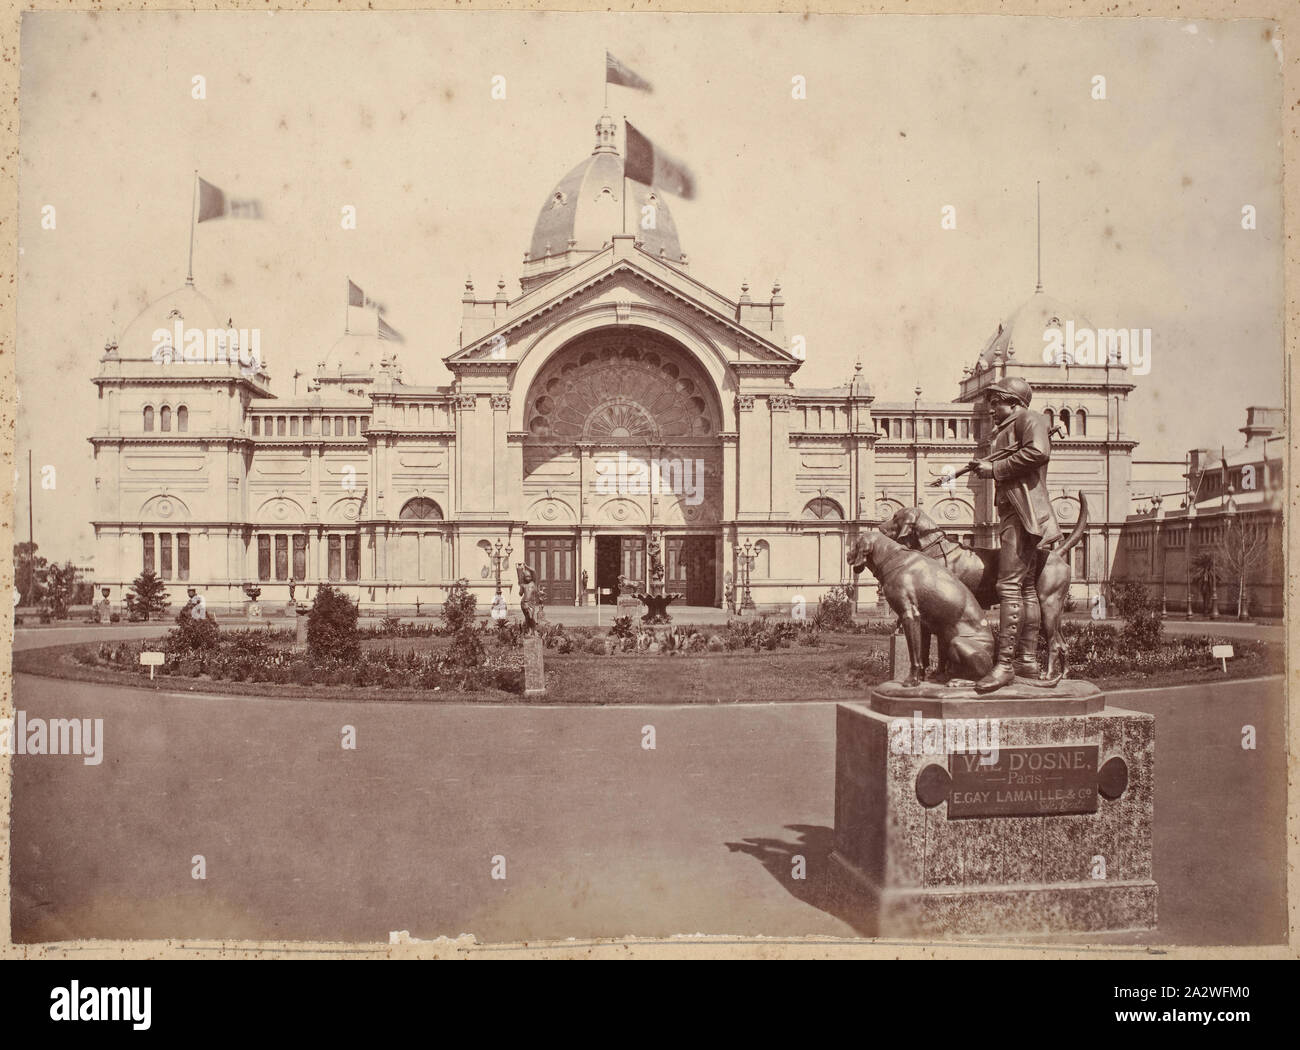 Photograph - French Fountain, Eastern Forecourt, Exhibition Building, 1880-1881, View of the French sculpture exhibits and original fountain in the eastern forecourt of the Exhibition Buildings, Carlton Gardens, between 1 October 1880 and 30 April 1881. Although it is unclear when the fountain was removed, photographs showing the eastern forecourt in the early twentieth century already reveal that the fountain had been replaced by the current design, manufactured by Antoine Stock Photo